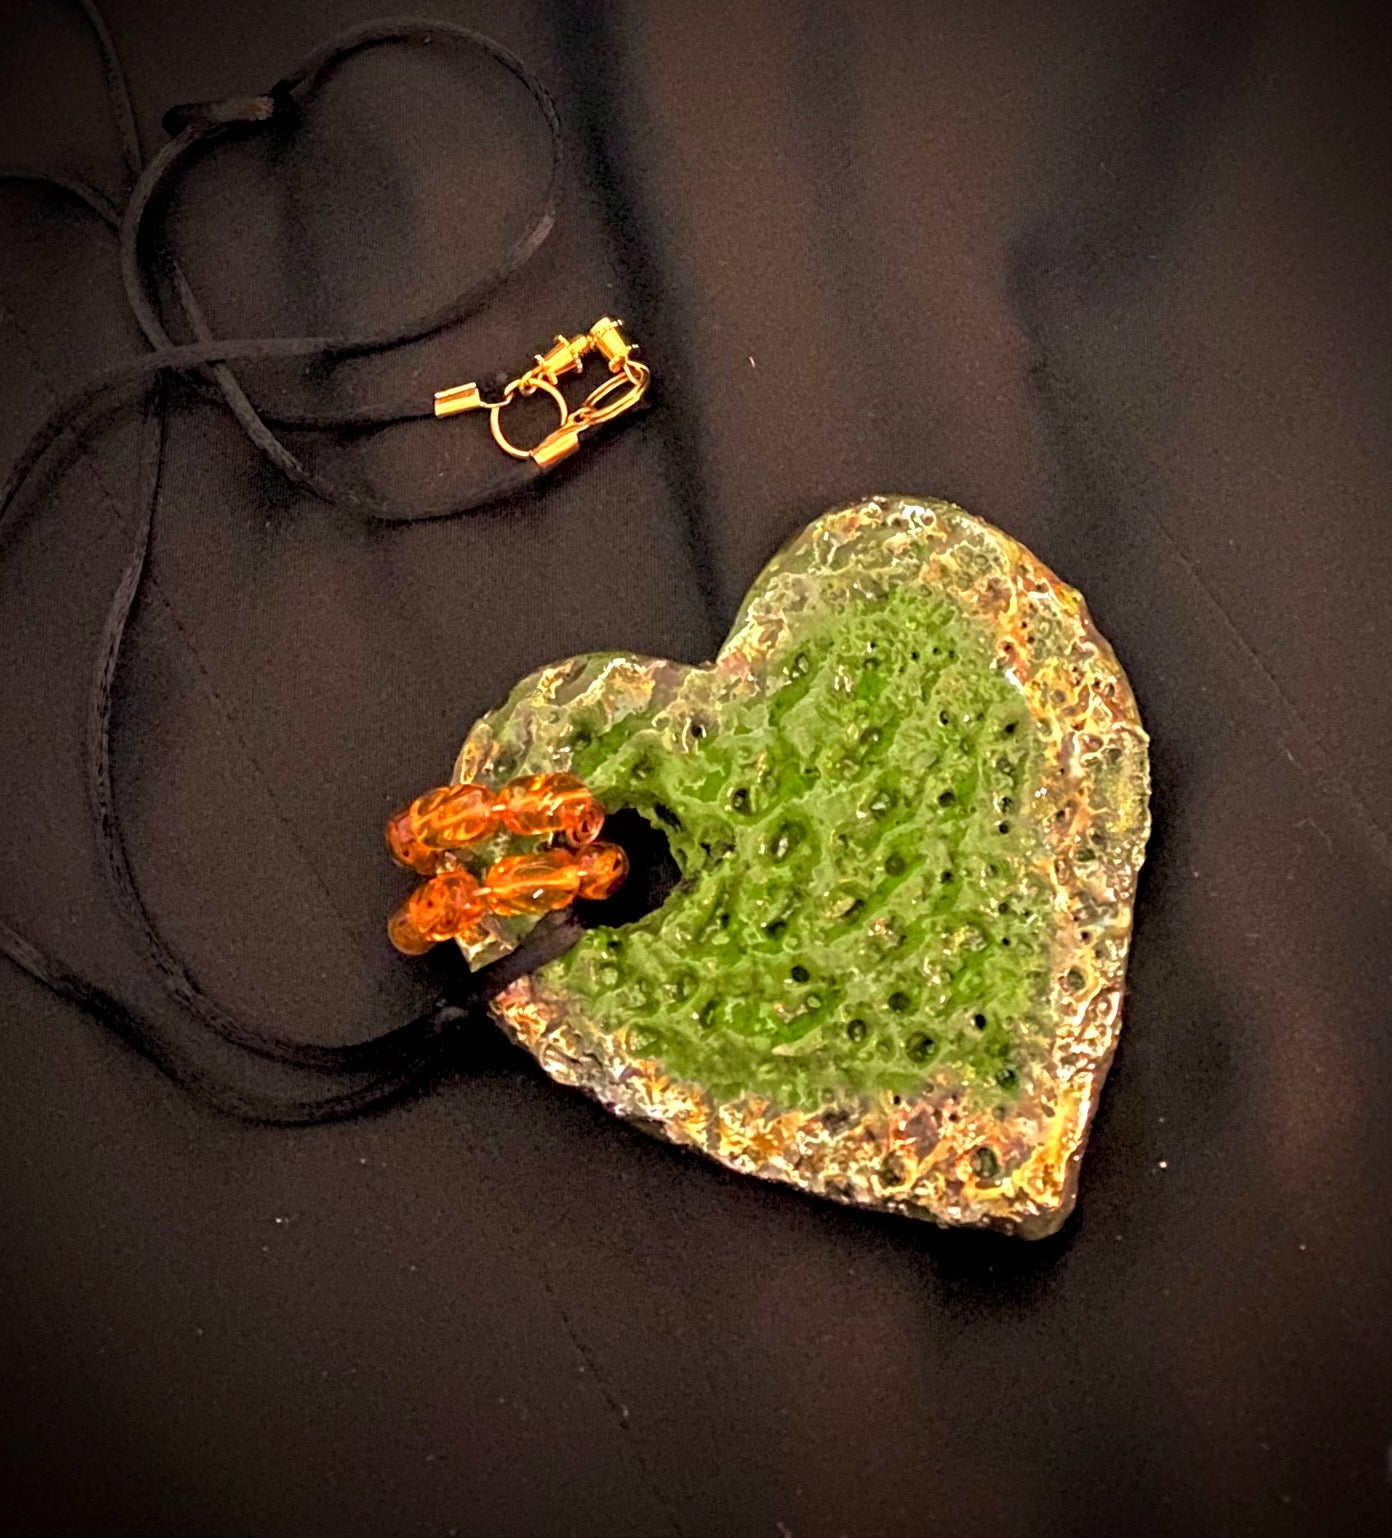 Have A Heart ! Each heart pendant is handmade with love! It is 3"x 3" and weighs approx. 3ozs. This pendant has a green and gold metallic raku glazes that renders a unique translucent  patina. The heart is highly textured. It holds a spiral of amber mini beads on a spiral copper wire. This pendant has a nice 12" black suede cord!